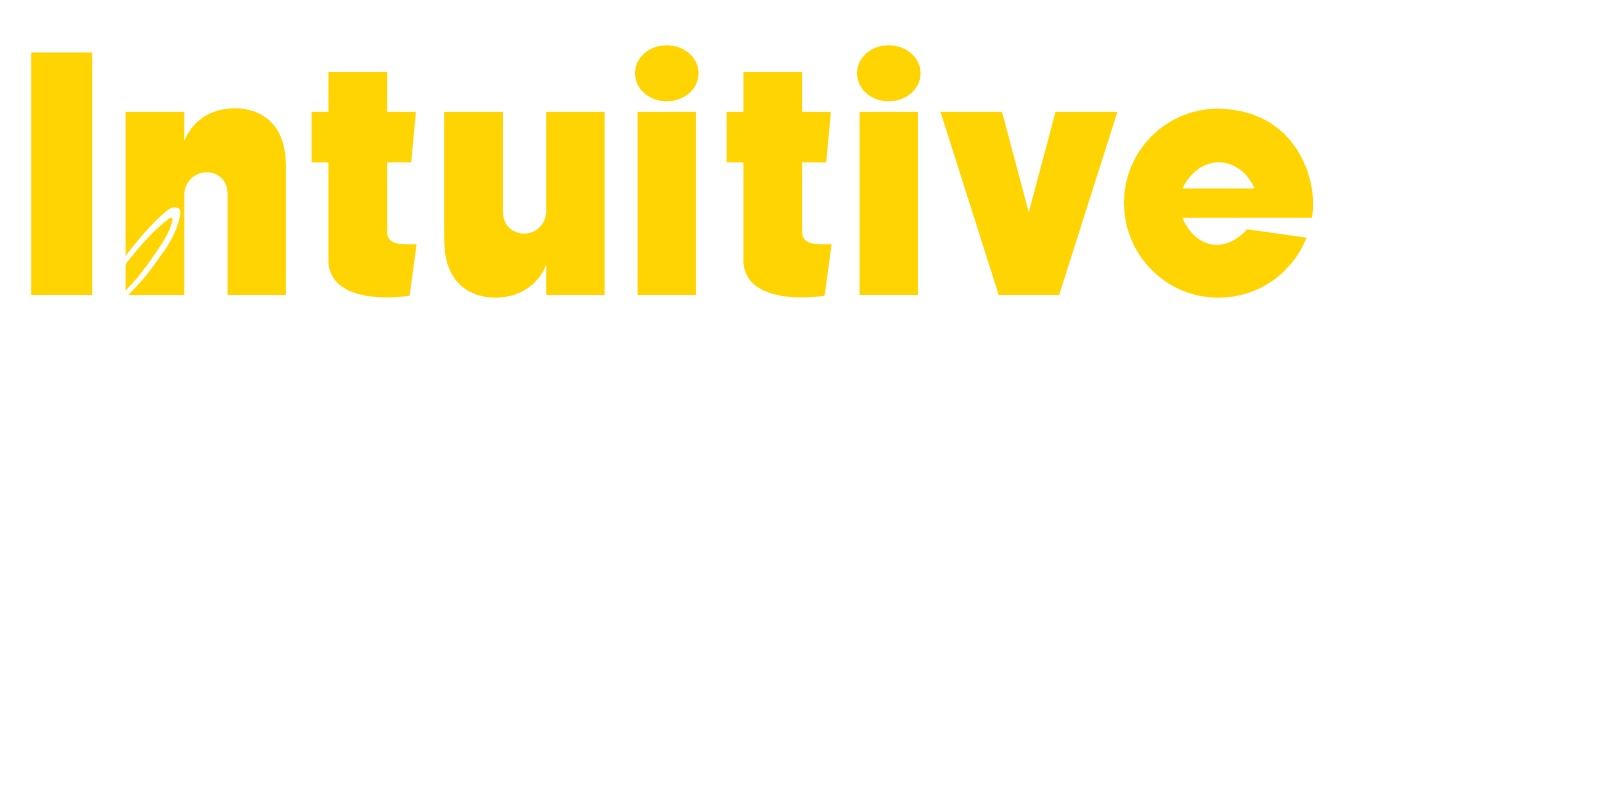 intuitive business strategist and life coach image text